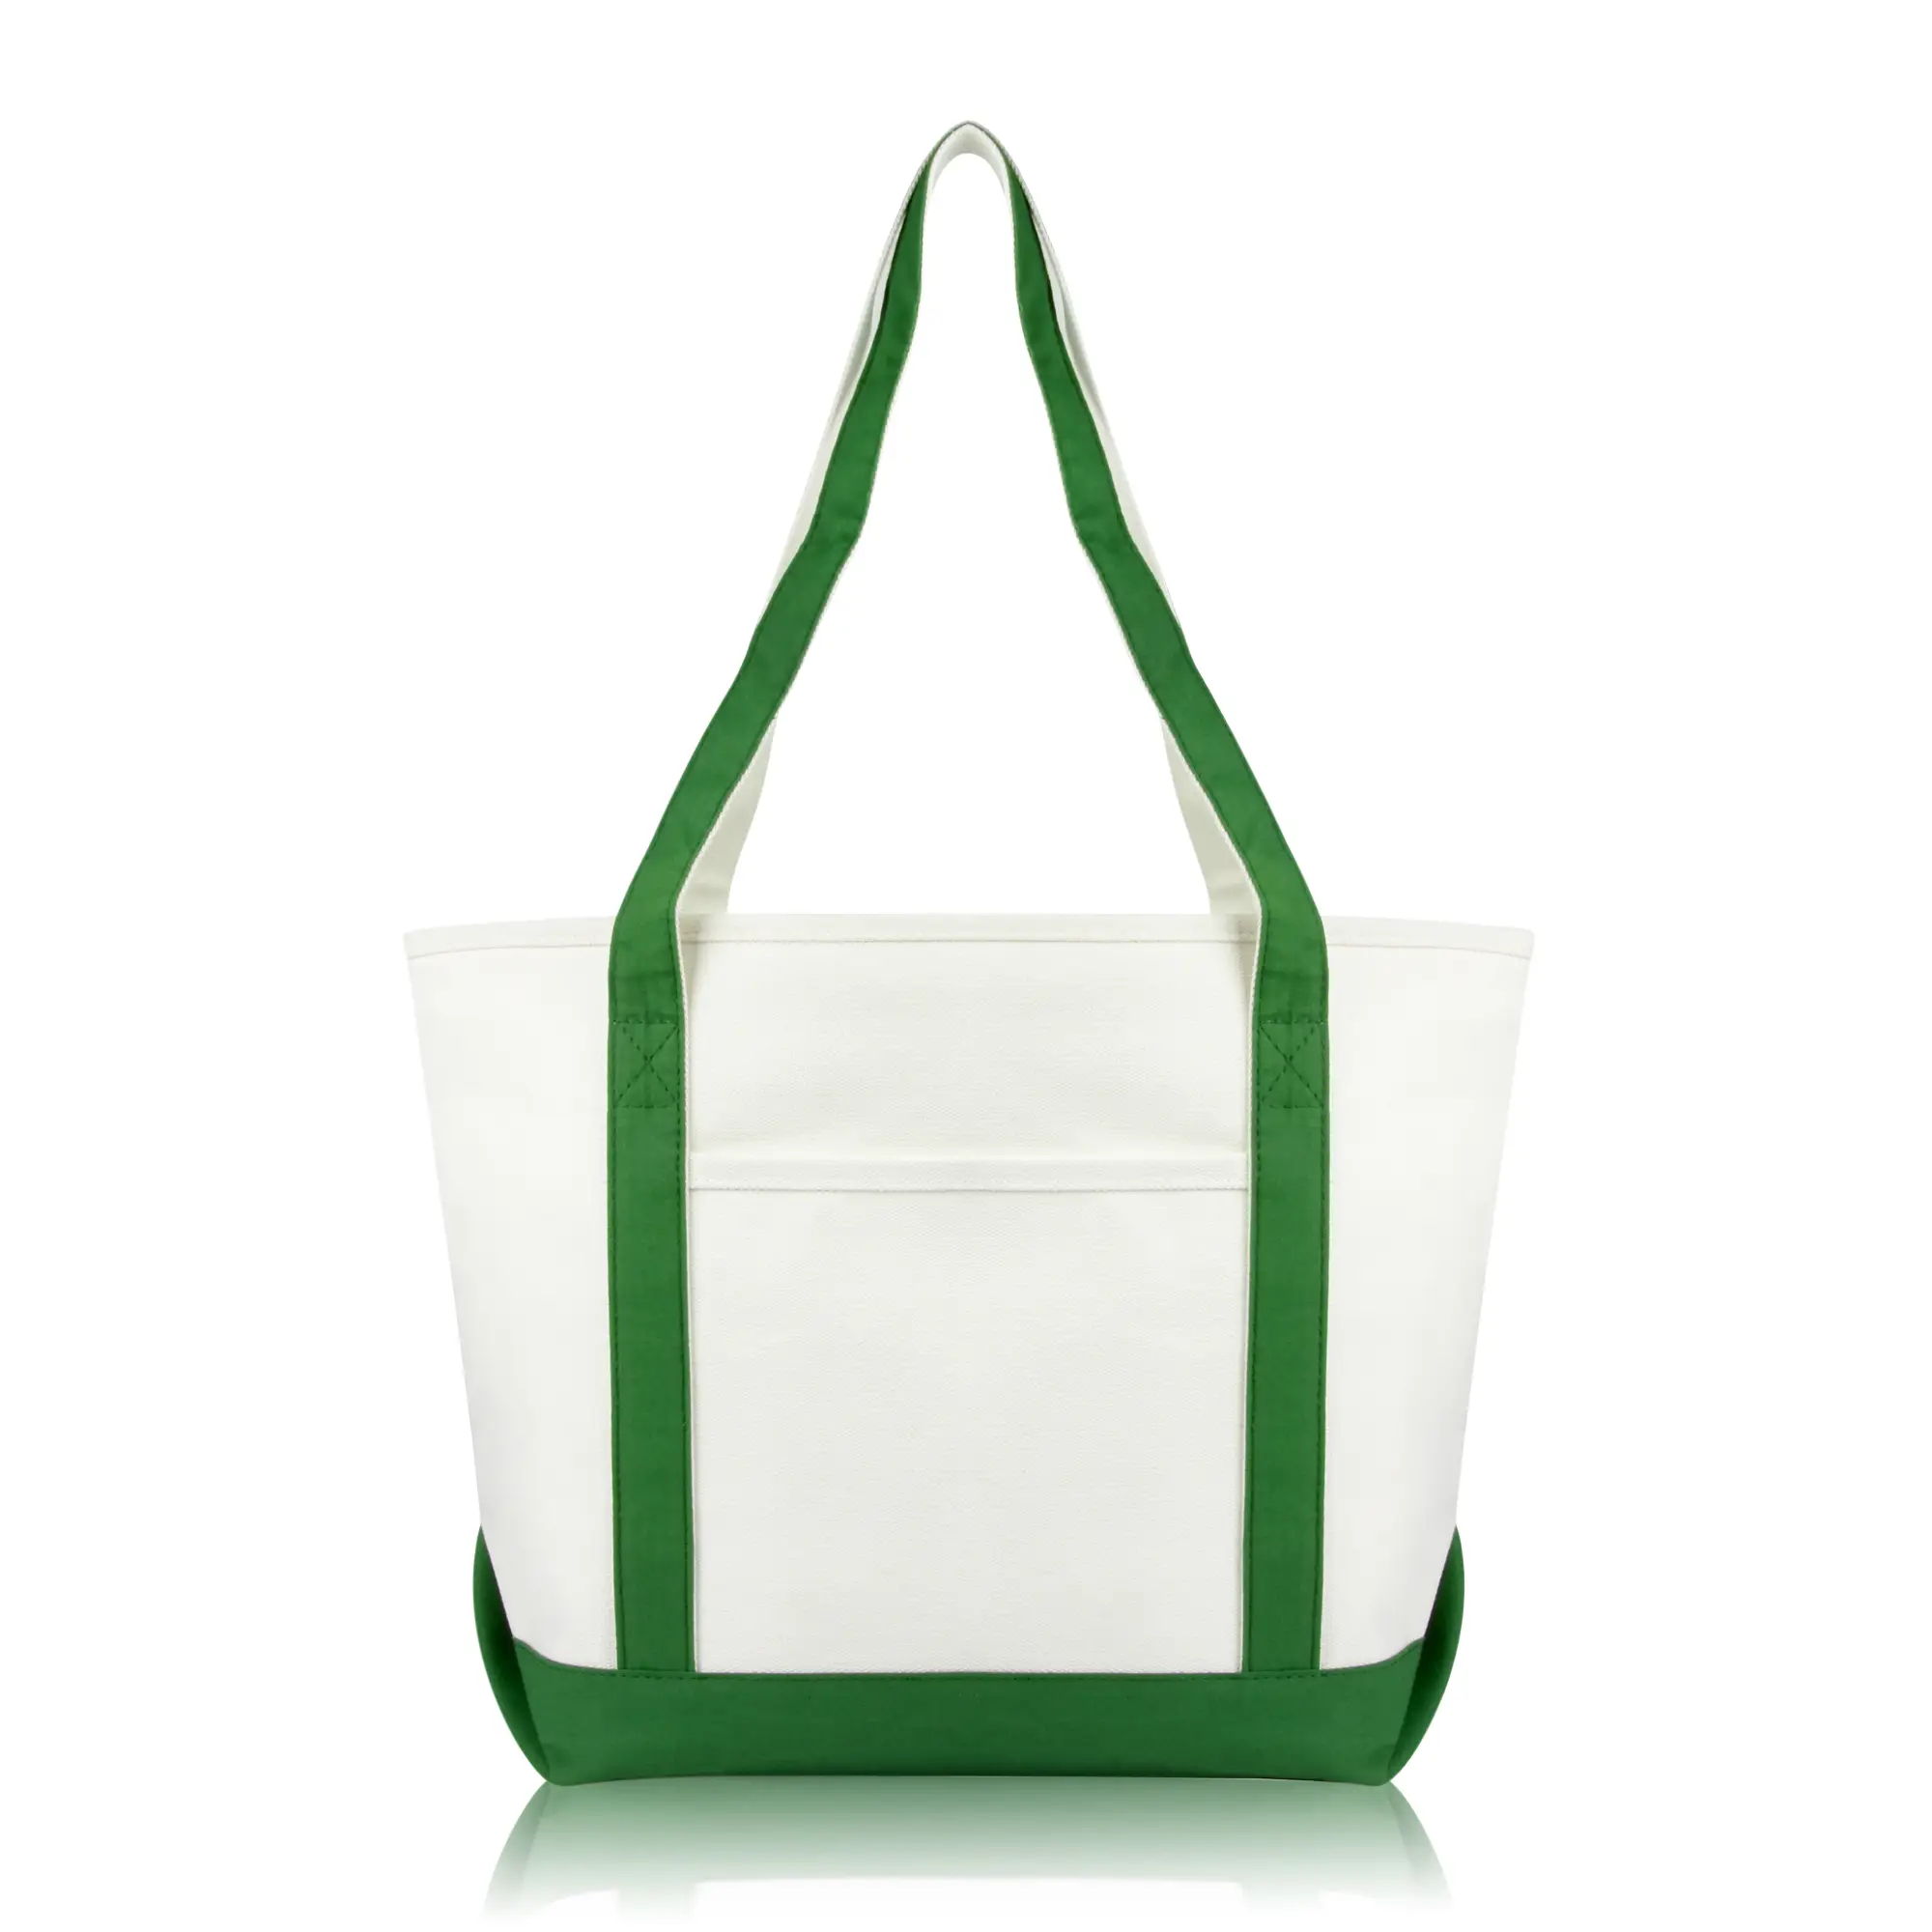 Green and White Canvas Tote – Shop 4-H